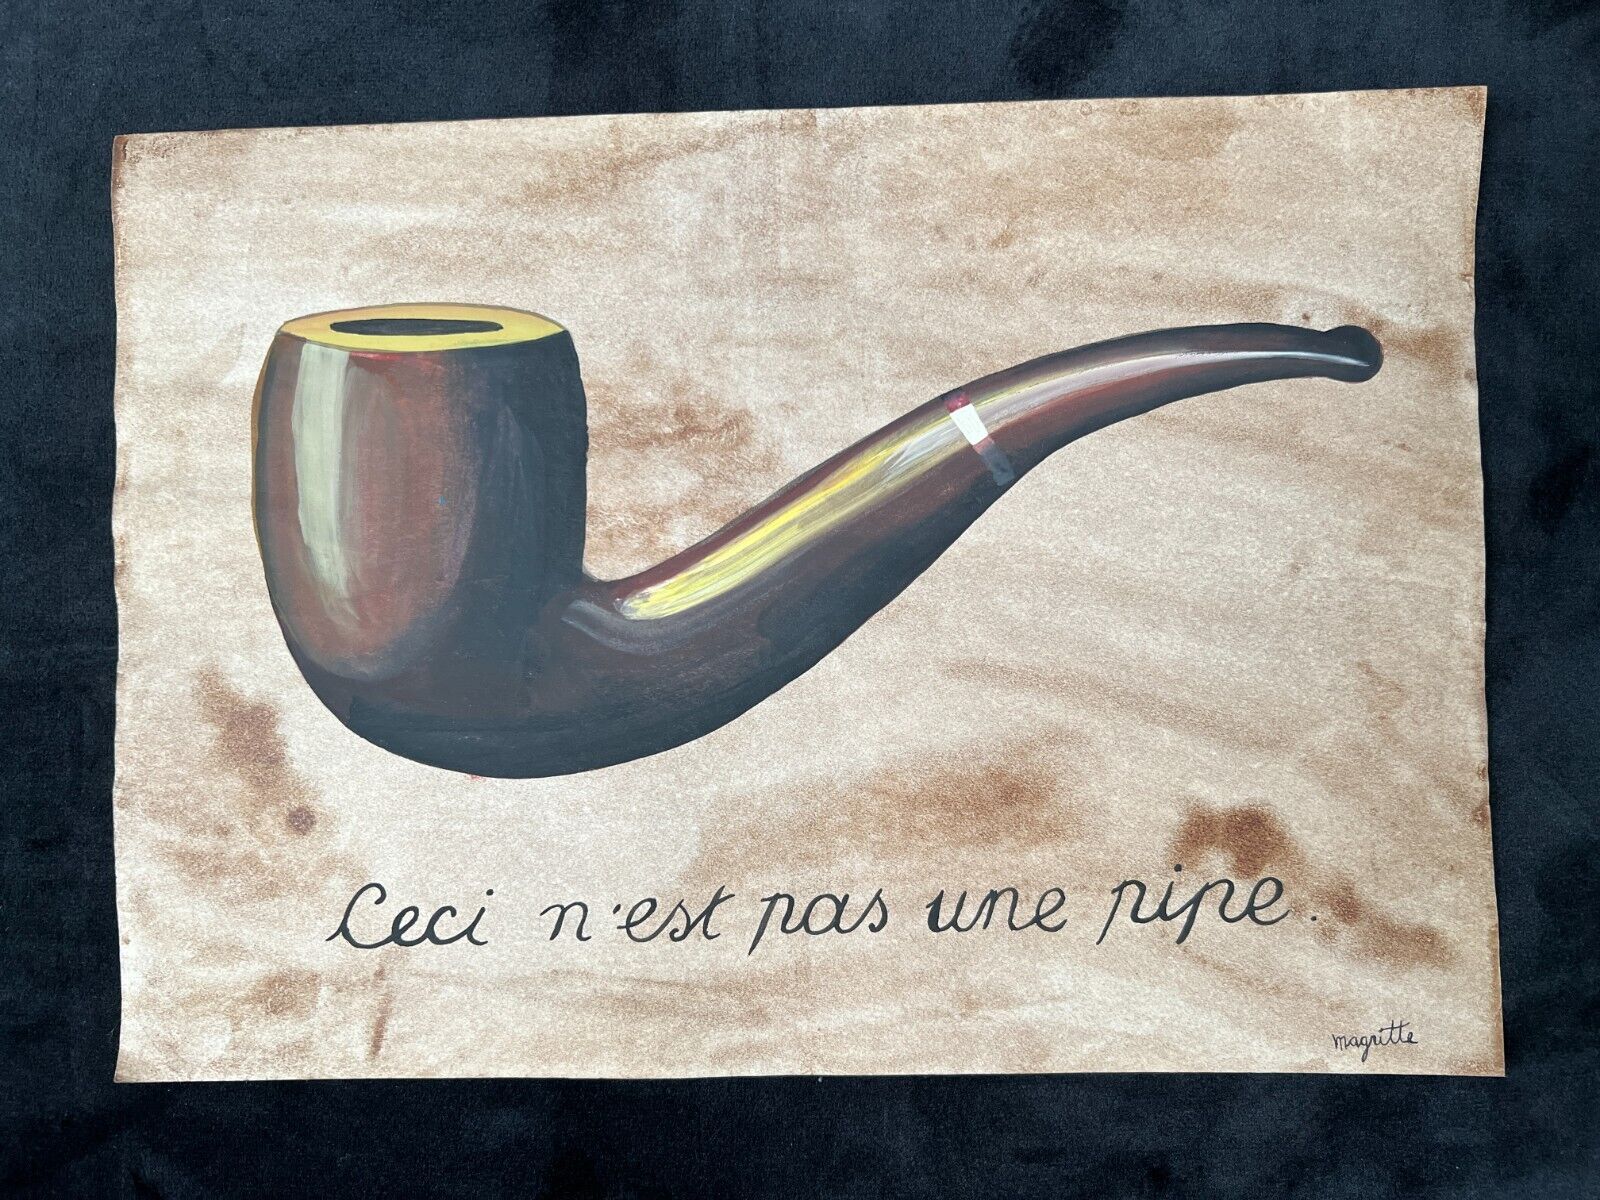 RENE MAGRITTE Drawing on paper (Handmade) signed and stamped mixed media vtg art